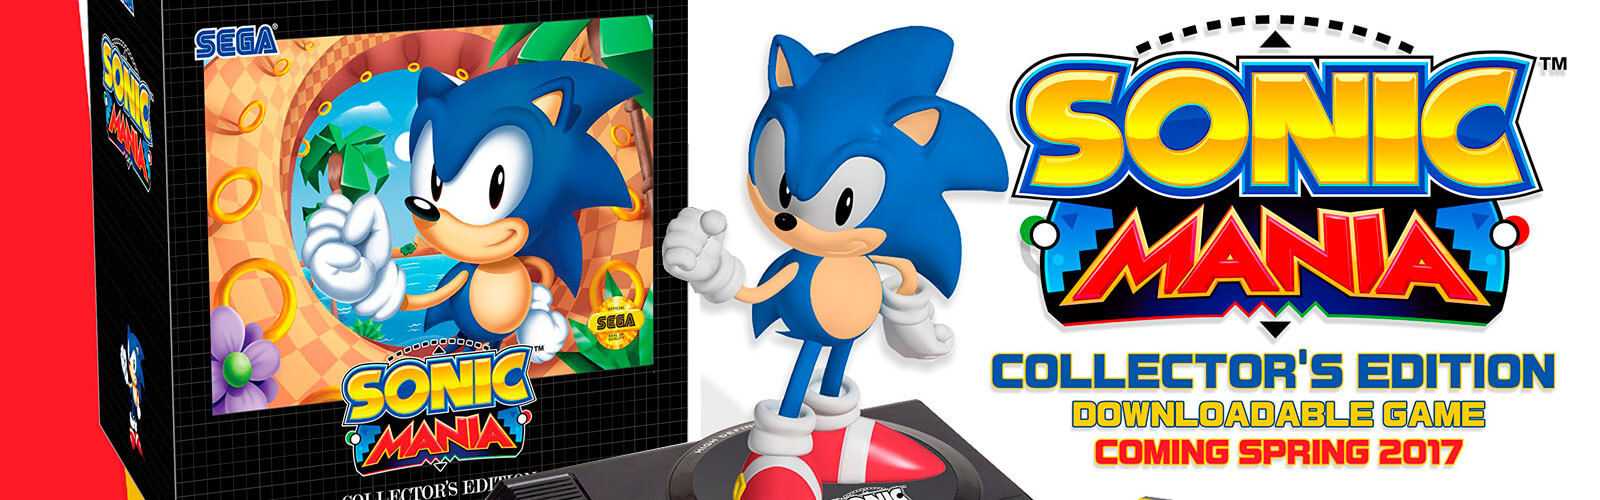 Sonic Mania: Collector's Edition Cover